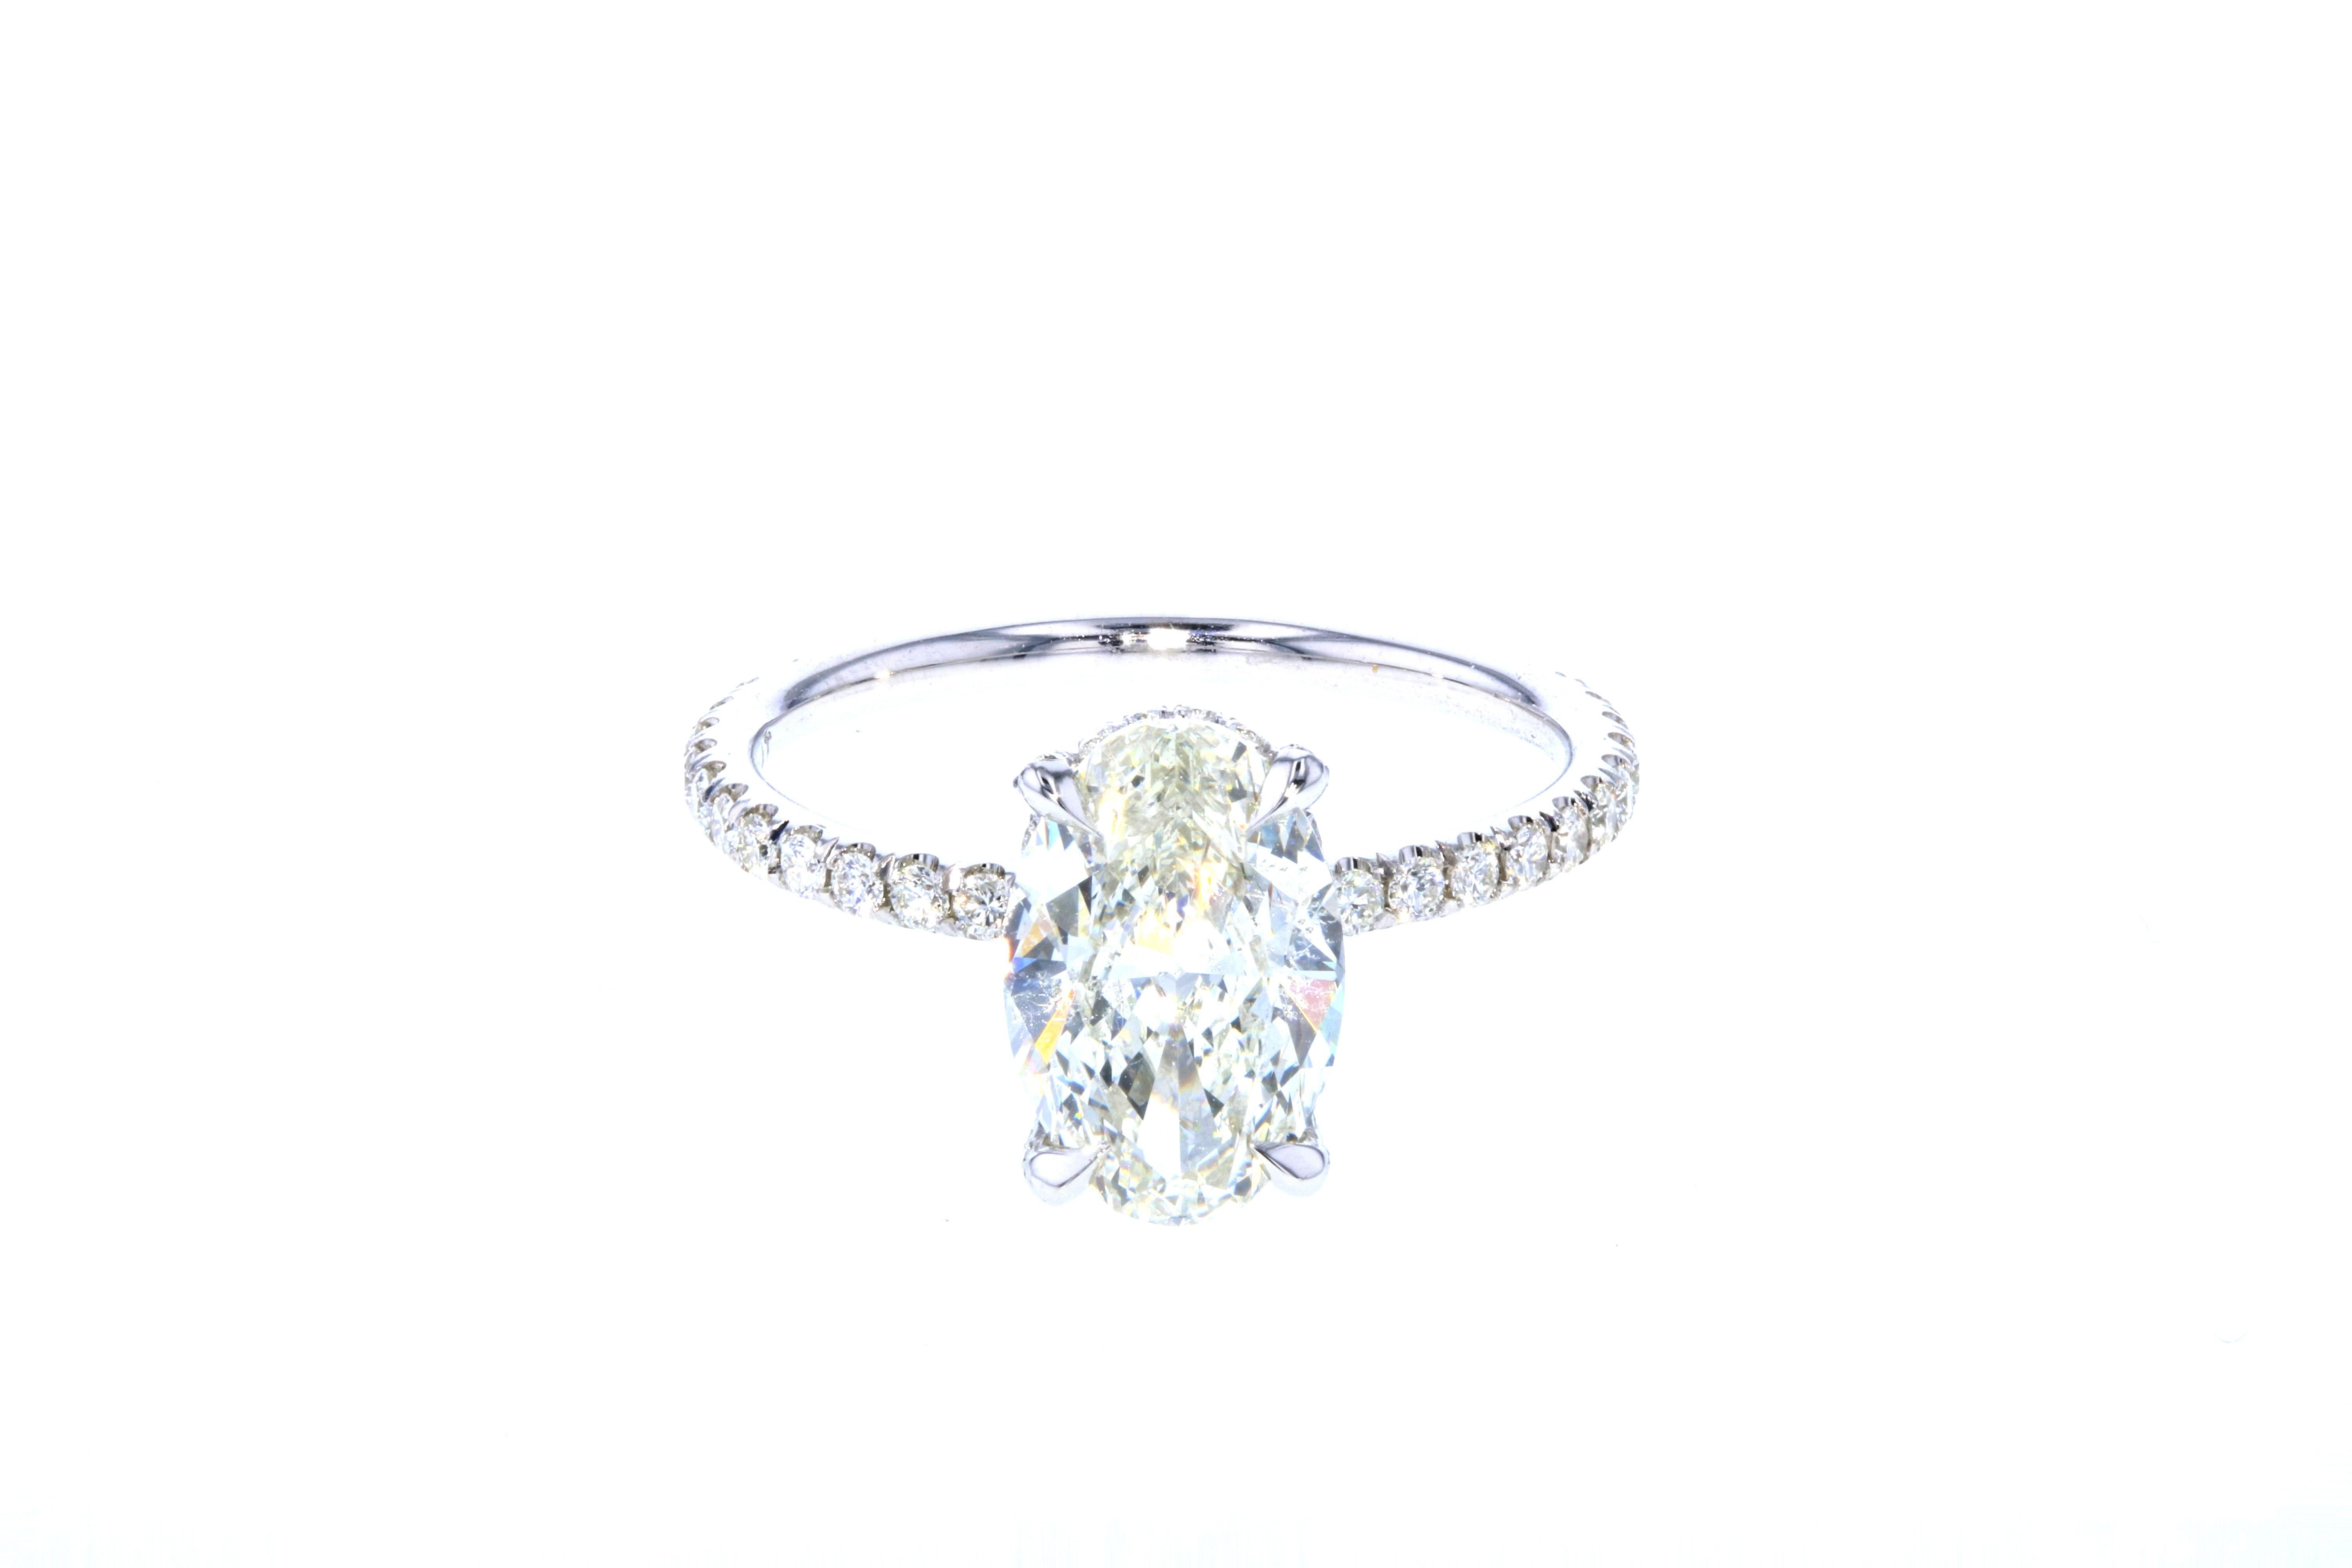 This diamond ring is crafted in platinum, contains an Oval Cut Diamond (2.03 total carat weight, I color, SI1 clarity) surrounded by 66 Round Brilliant Cut Diamonds (0.48 total carat weight, I color, VS clarity).

A hidden halo is the perfect type